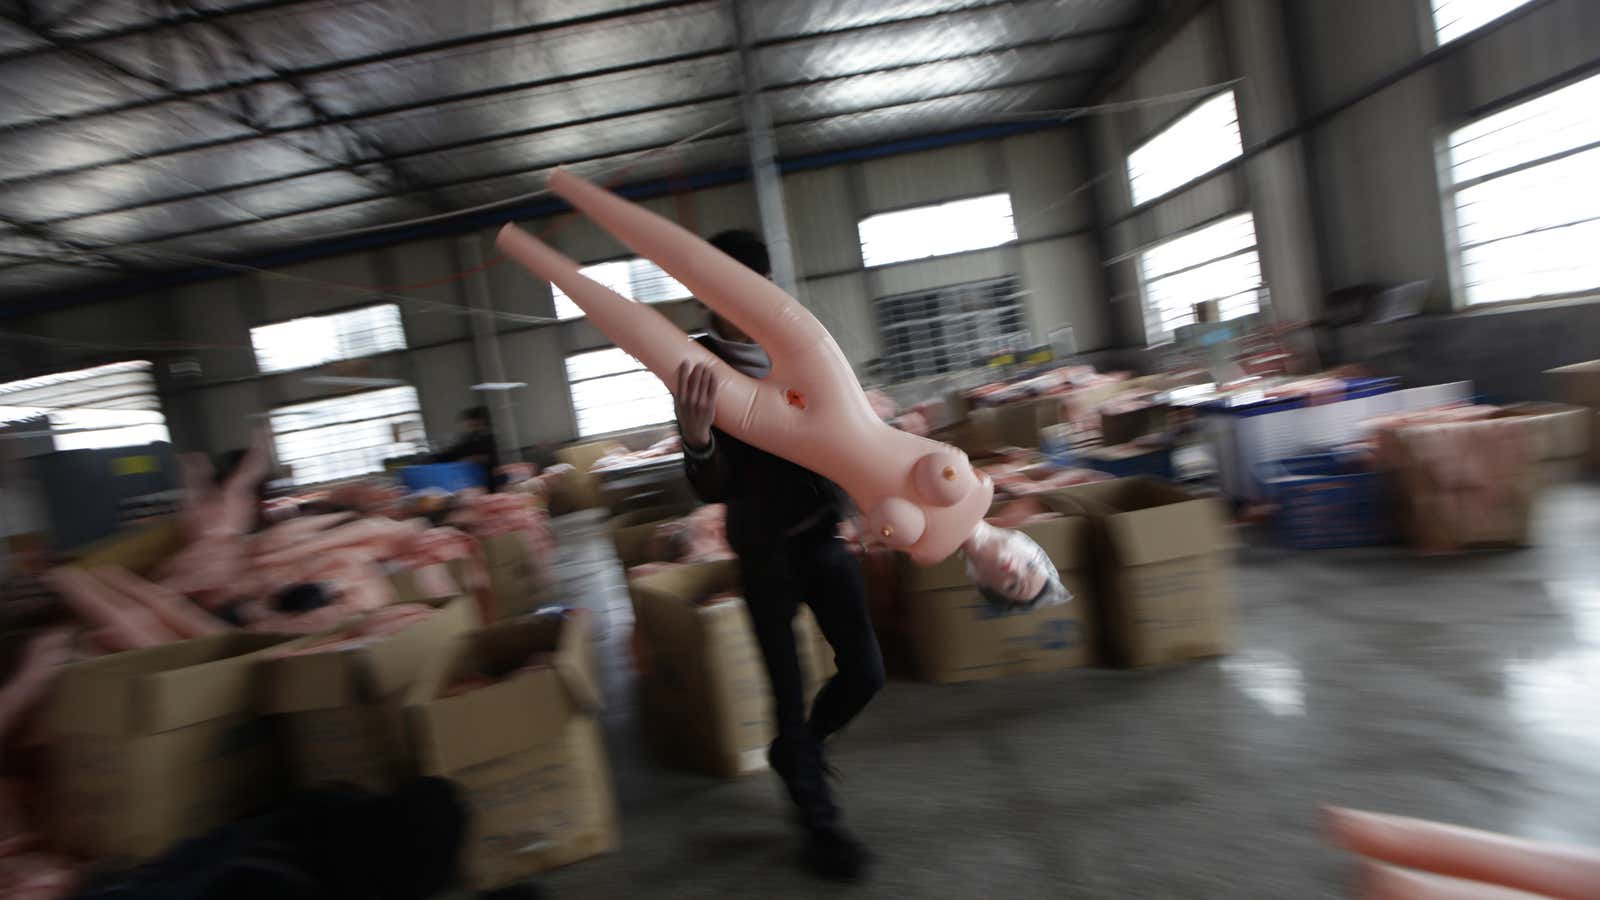 Inflatable sex dolls made up part of China’s underinflated export data.